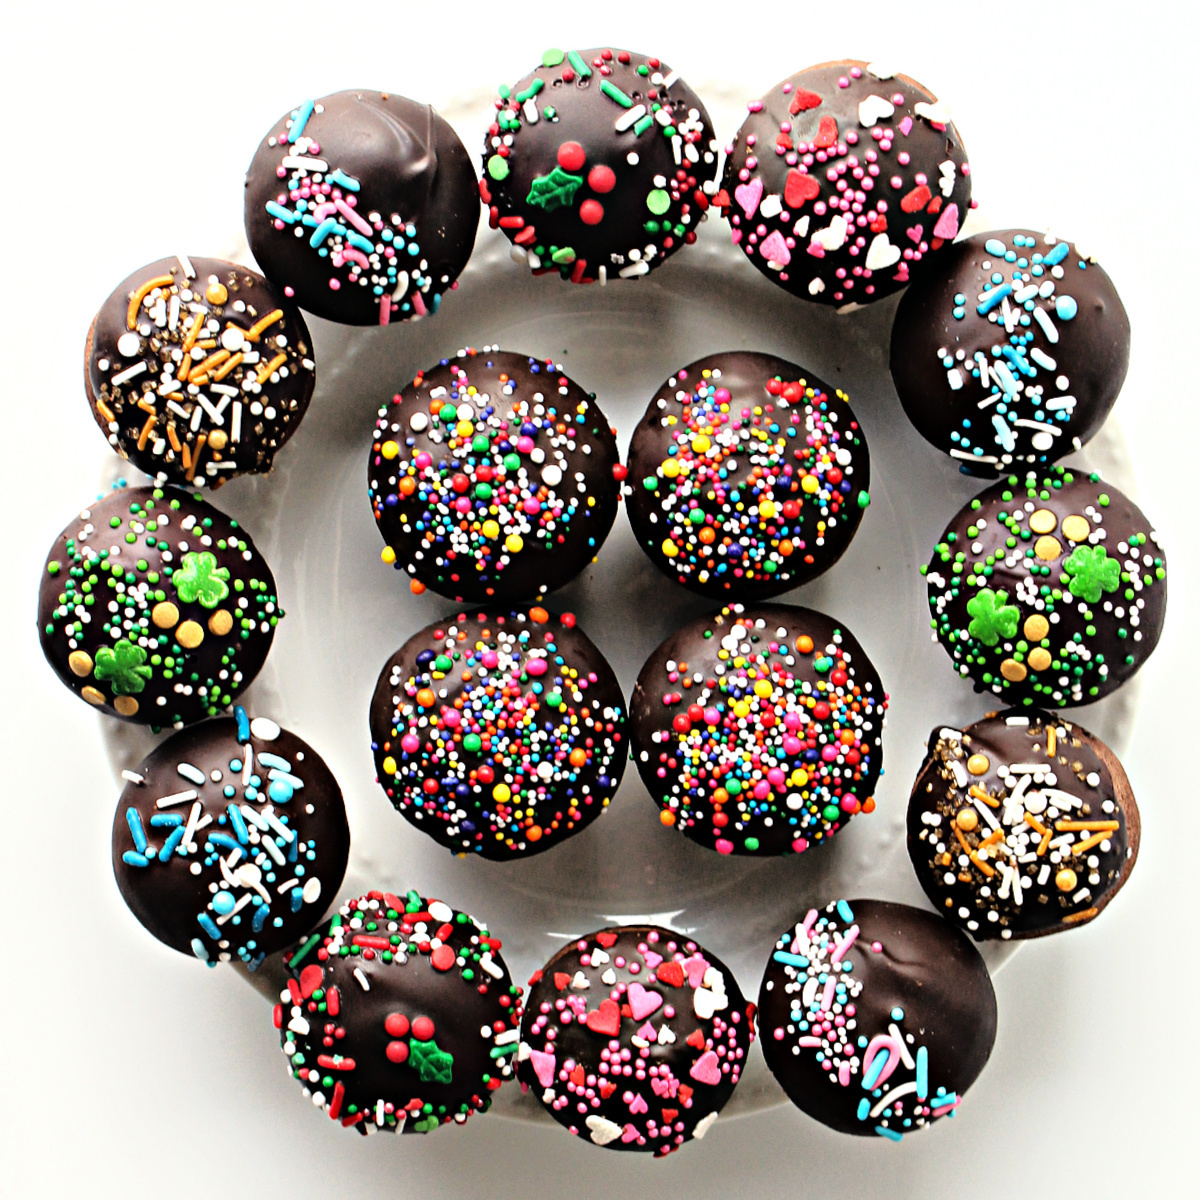 Balls of chocolate cookies each dipped in chocolate and topped with holiday sprinkles.